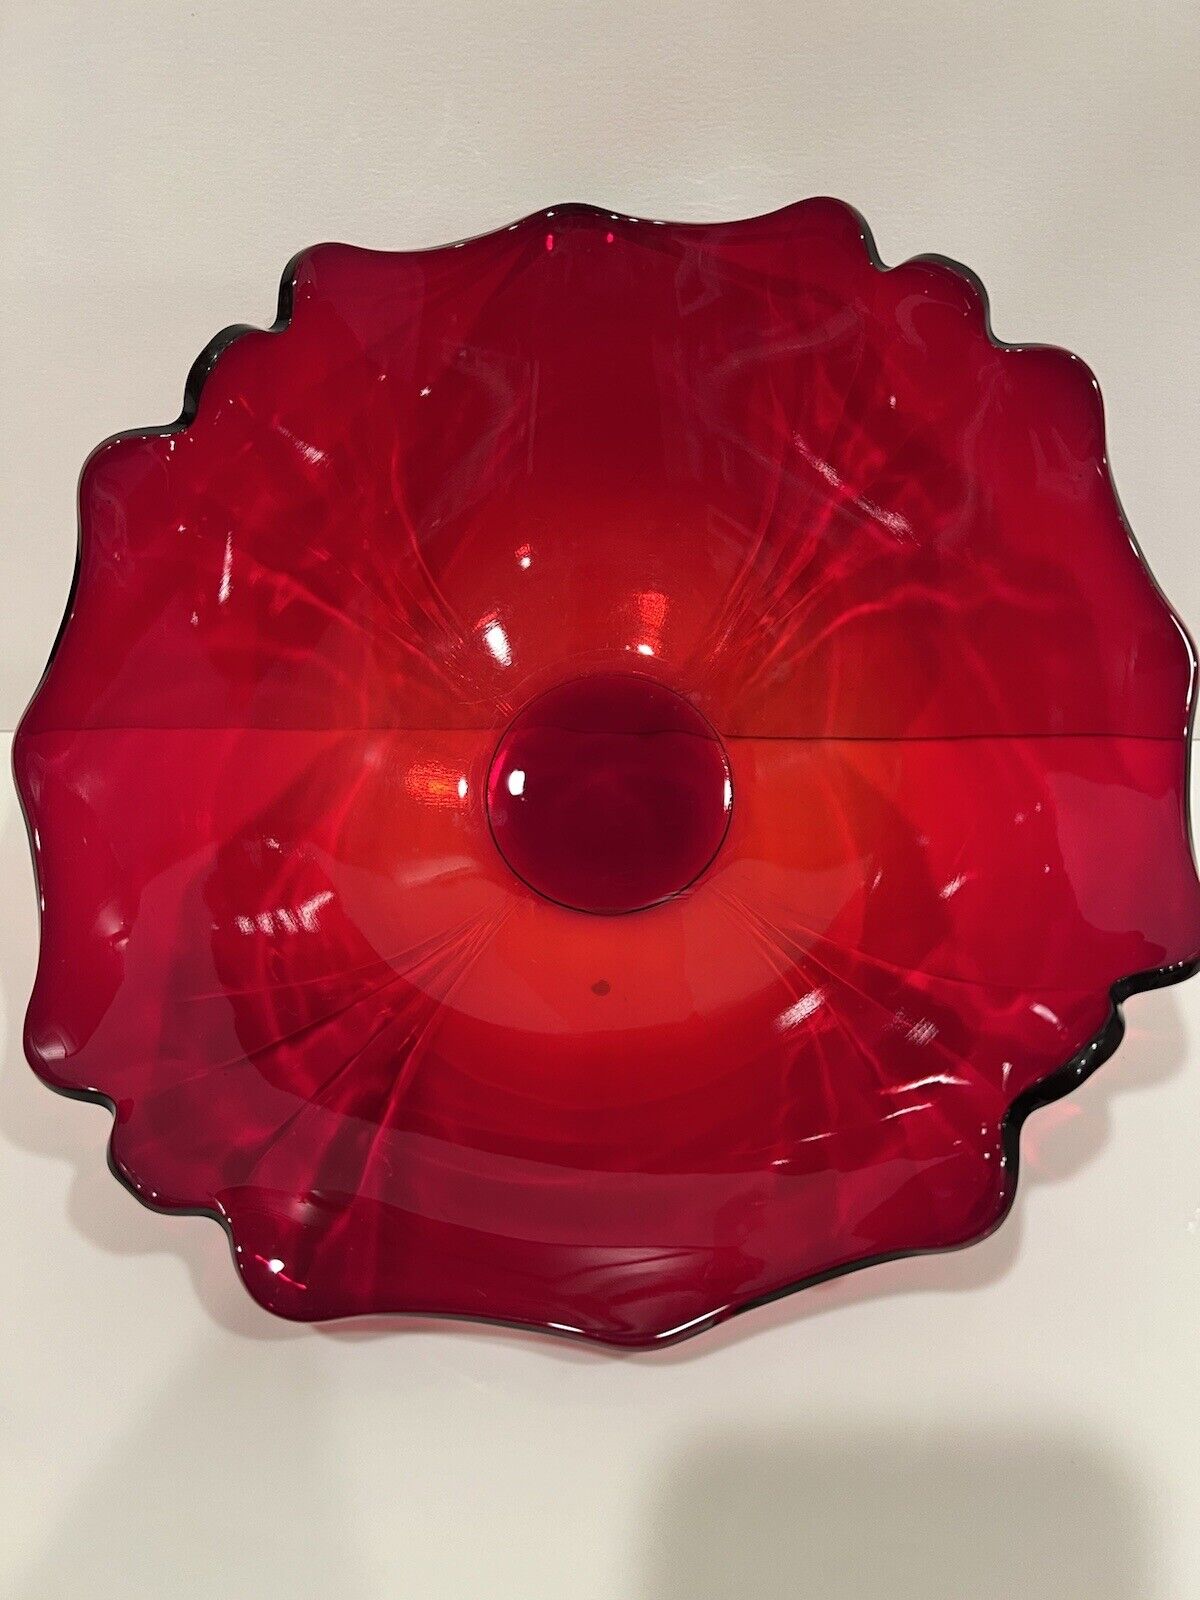 Vintage Ruby Red Glass Ruffled Collar Fruit Bowl